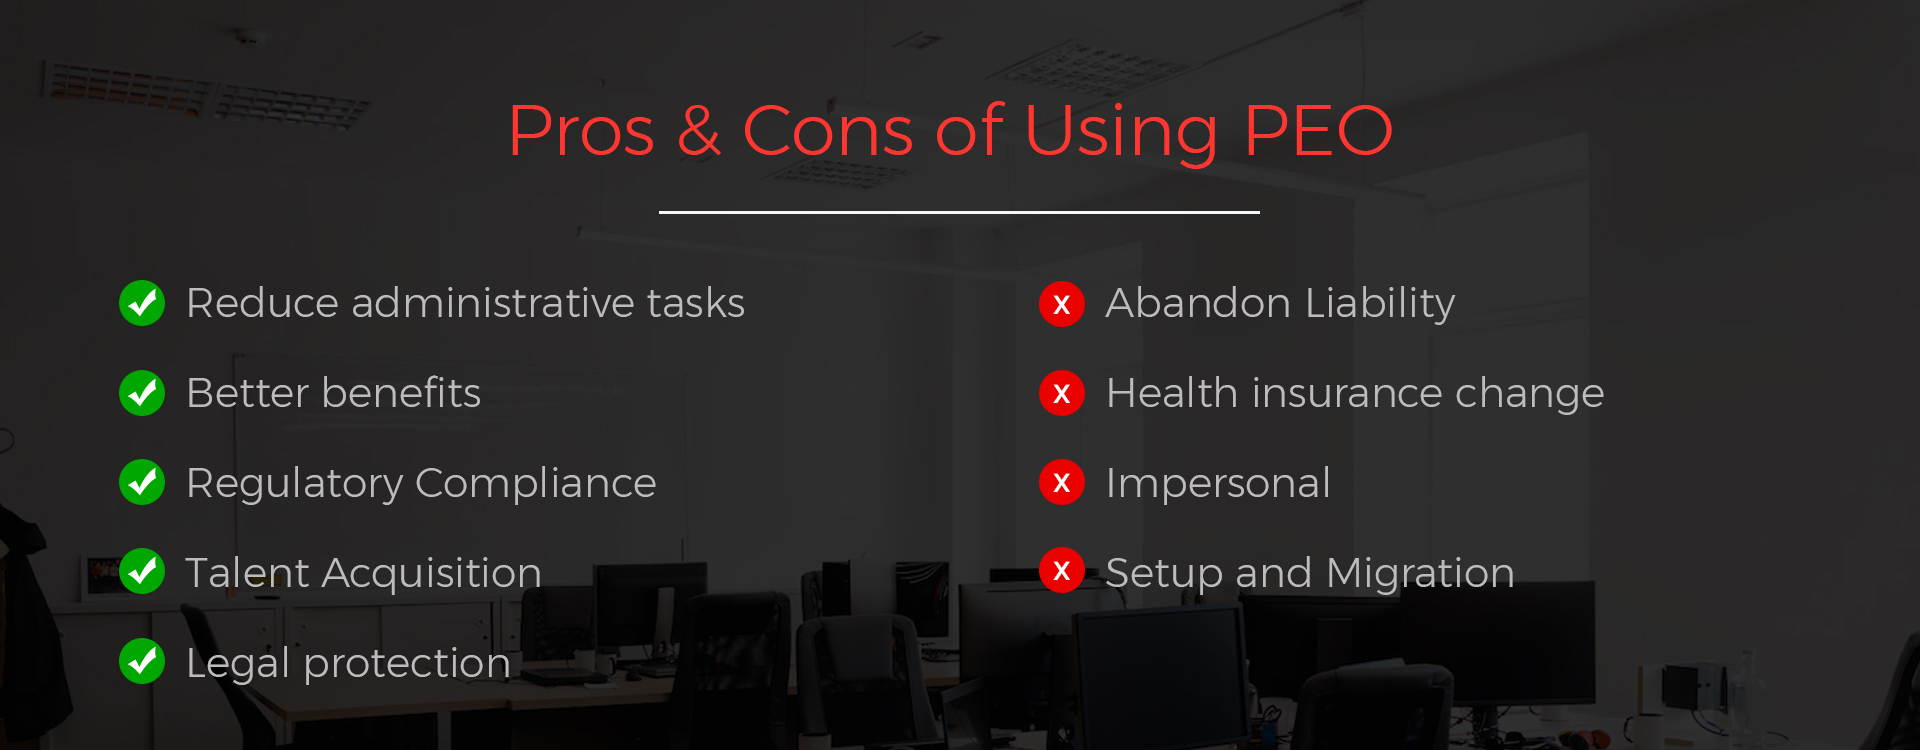 Pros-and0Cons-of-Using-PEO